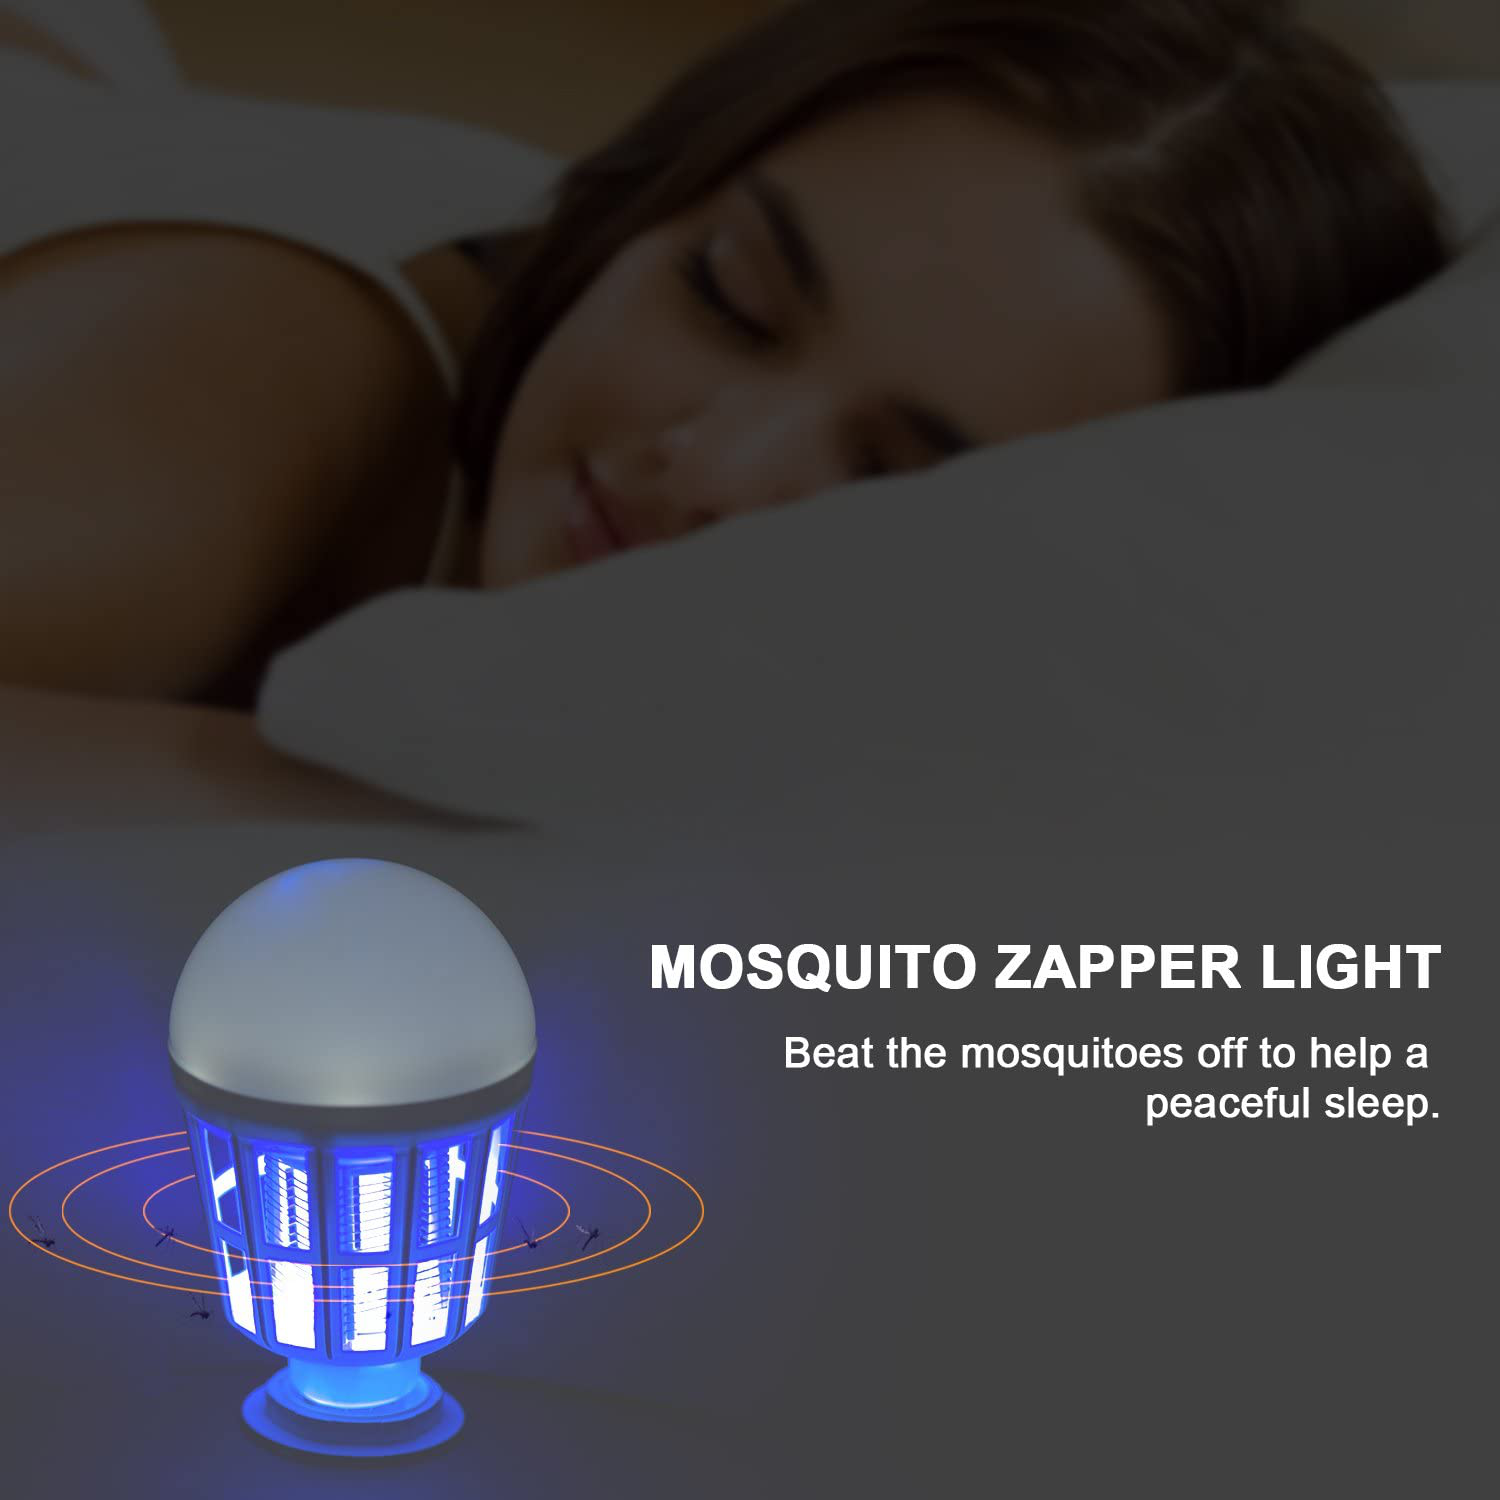 SUNNEST Bug Zapper, 2 in 1 Mosquito Killer Lamp Bug Zappers Light Bulb, Electronic Insect & Fly Killer for Home Kitchen Indoor Outdoor Patio Backyard - 110V E26/E27